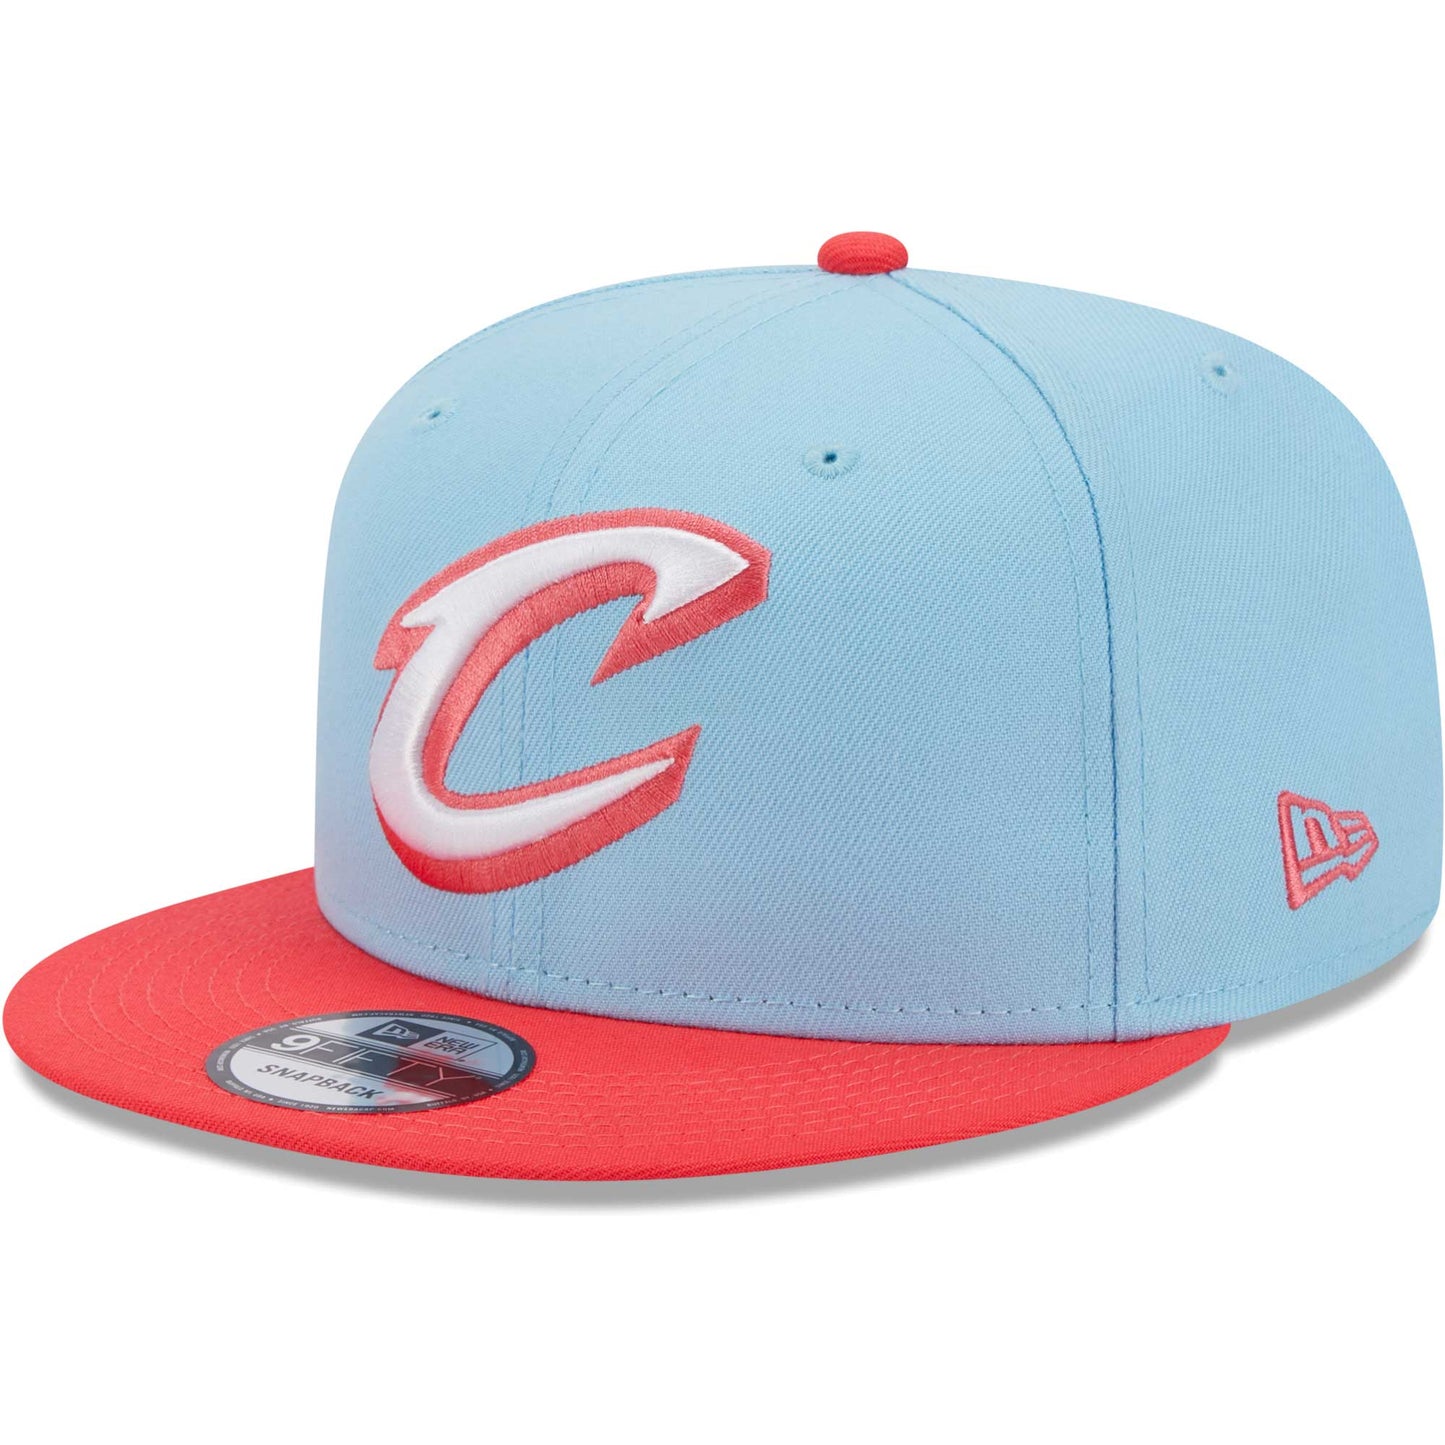 Cleveland Cavaliers New Era 2-Tone Color Pack 9FIFTY Snapback Hat - Powder Blue/Red